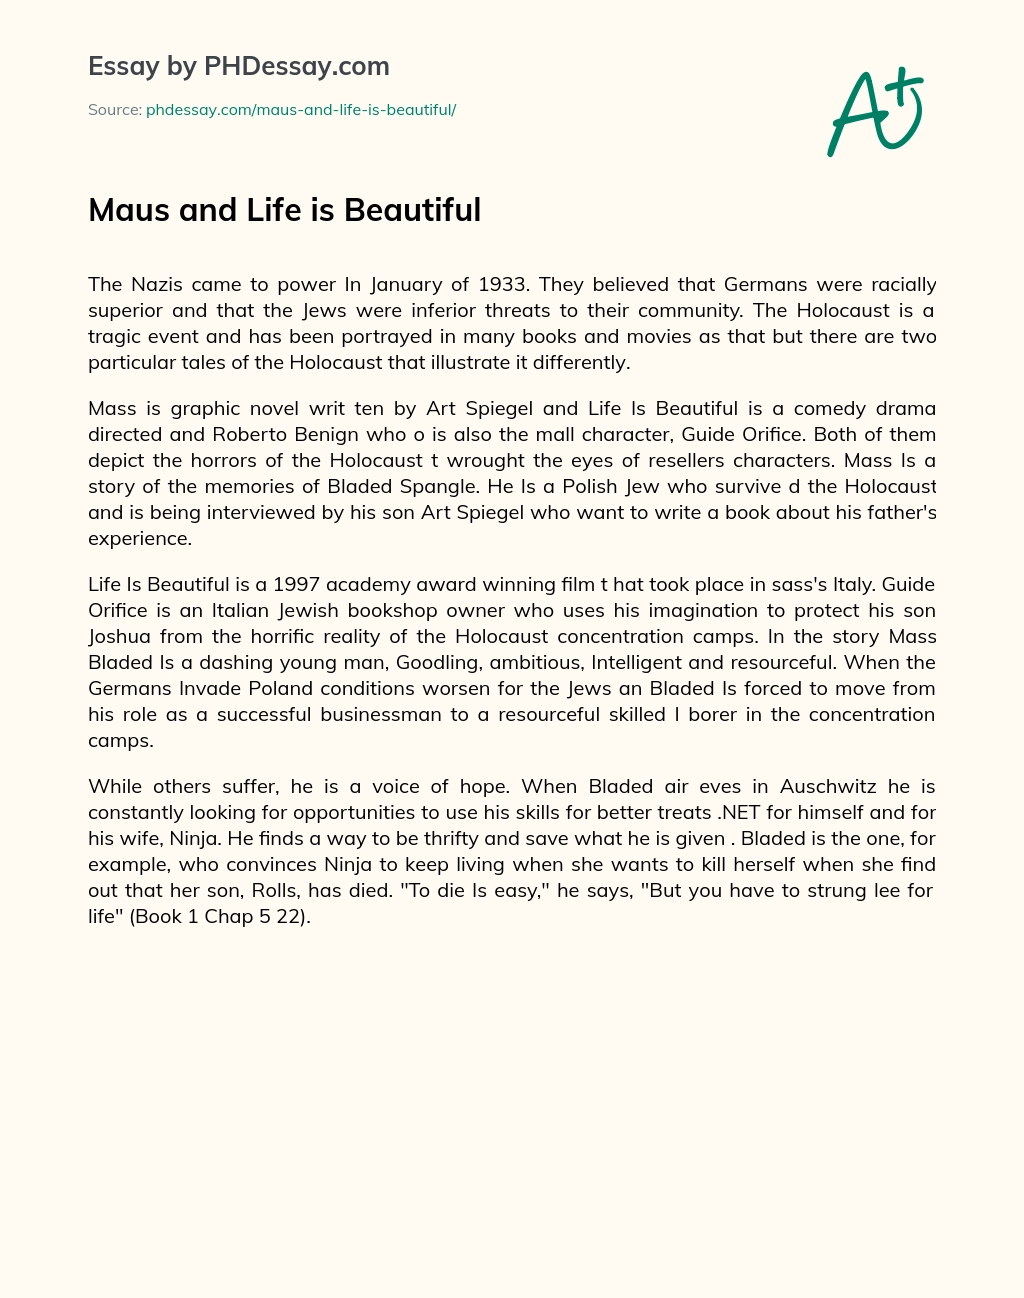 Maus and Life is Beautiful essay